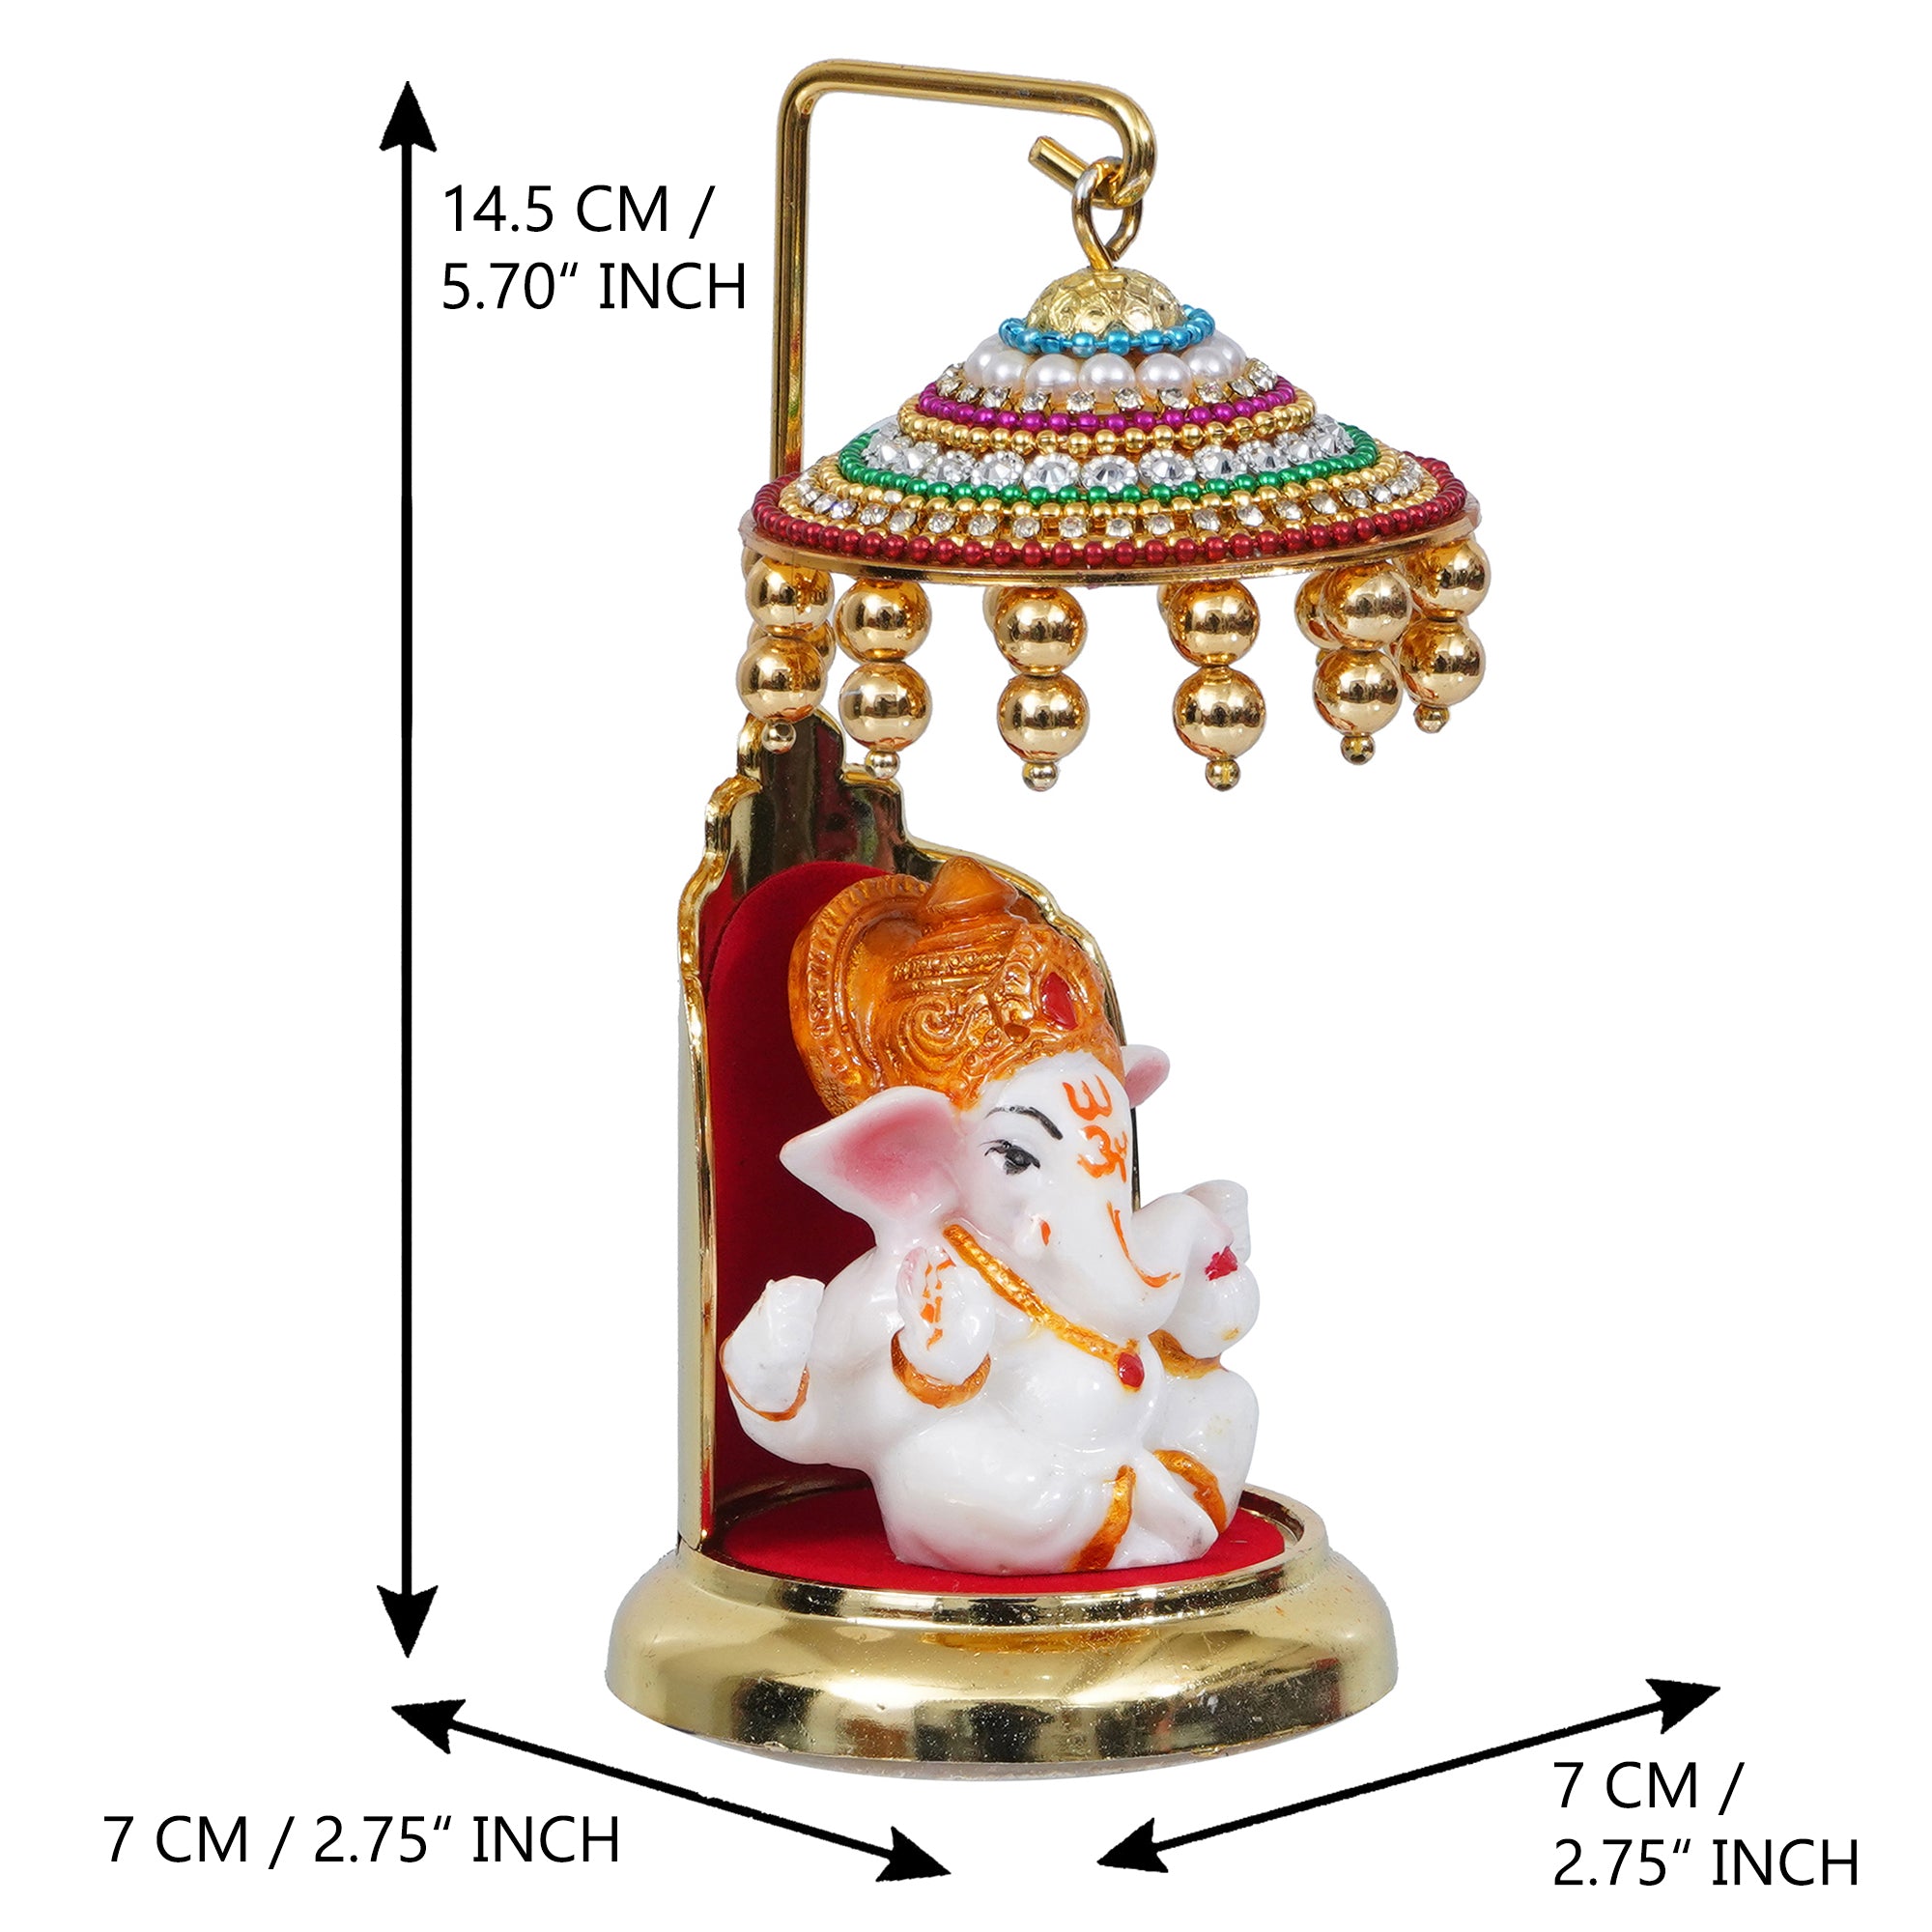 Decorative Lord Ganesha Idol with Designer Chatri for Car Dashboard, Home Temple and Office Desks 3